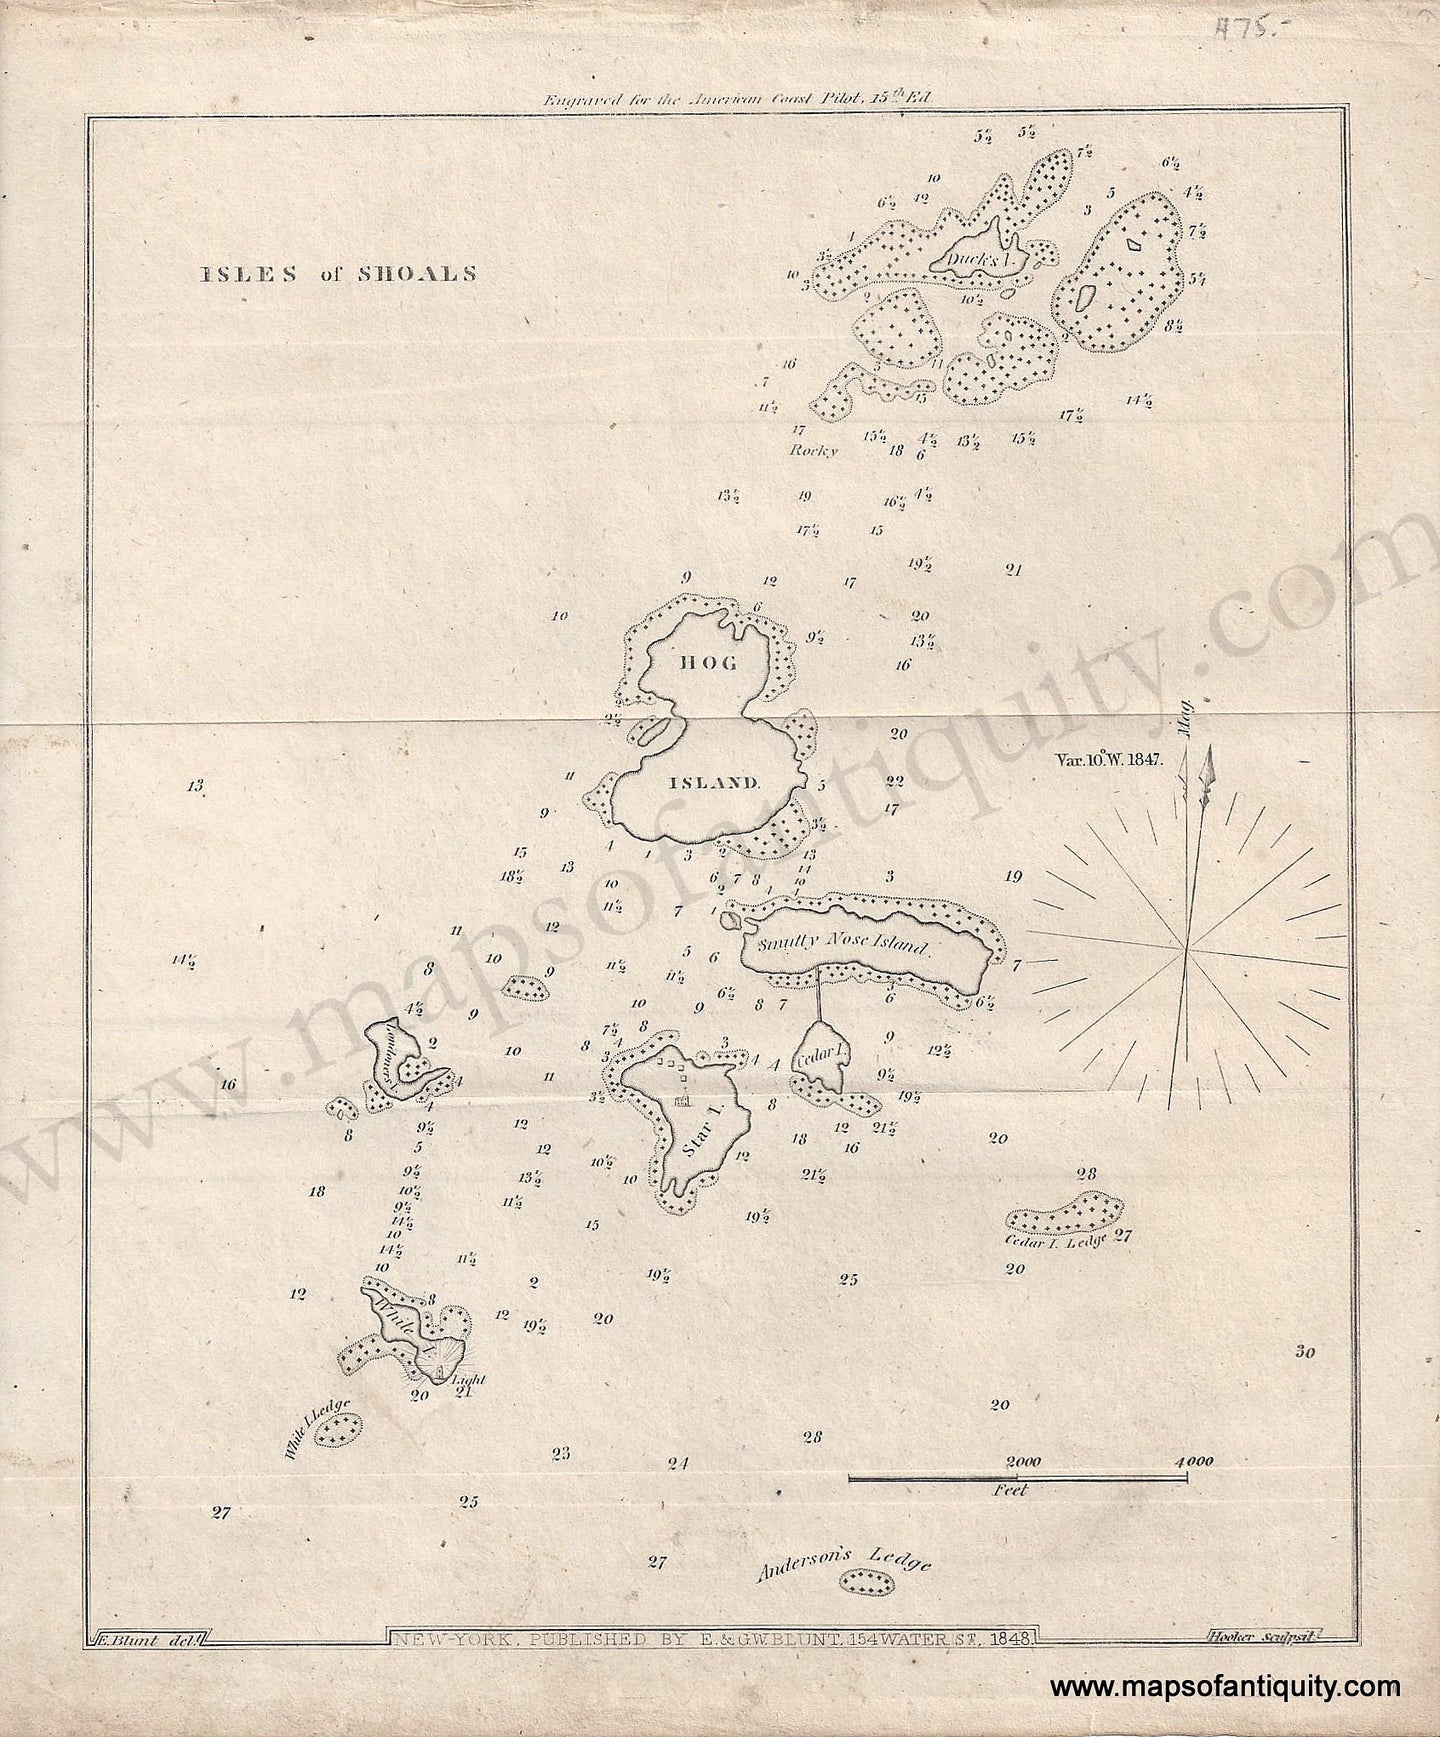 Antique-Black-and-White-Chart-Isles-of-Shoals--United-States-Northeast-1827-Blunt-Maps-Of-Antiquity